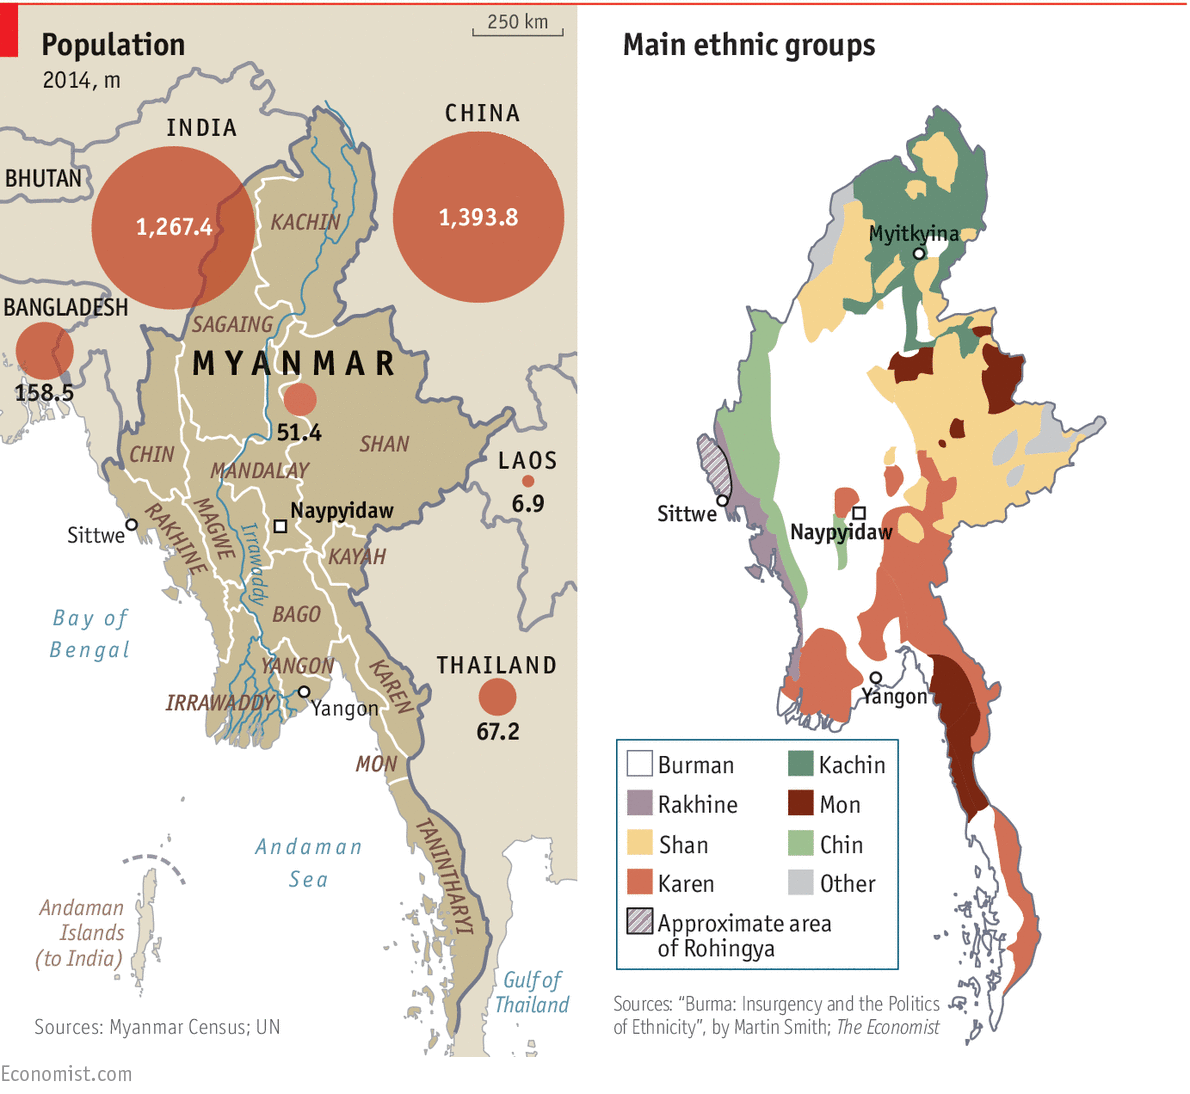 Population and Main ethnic groups.